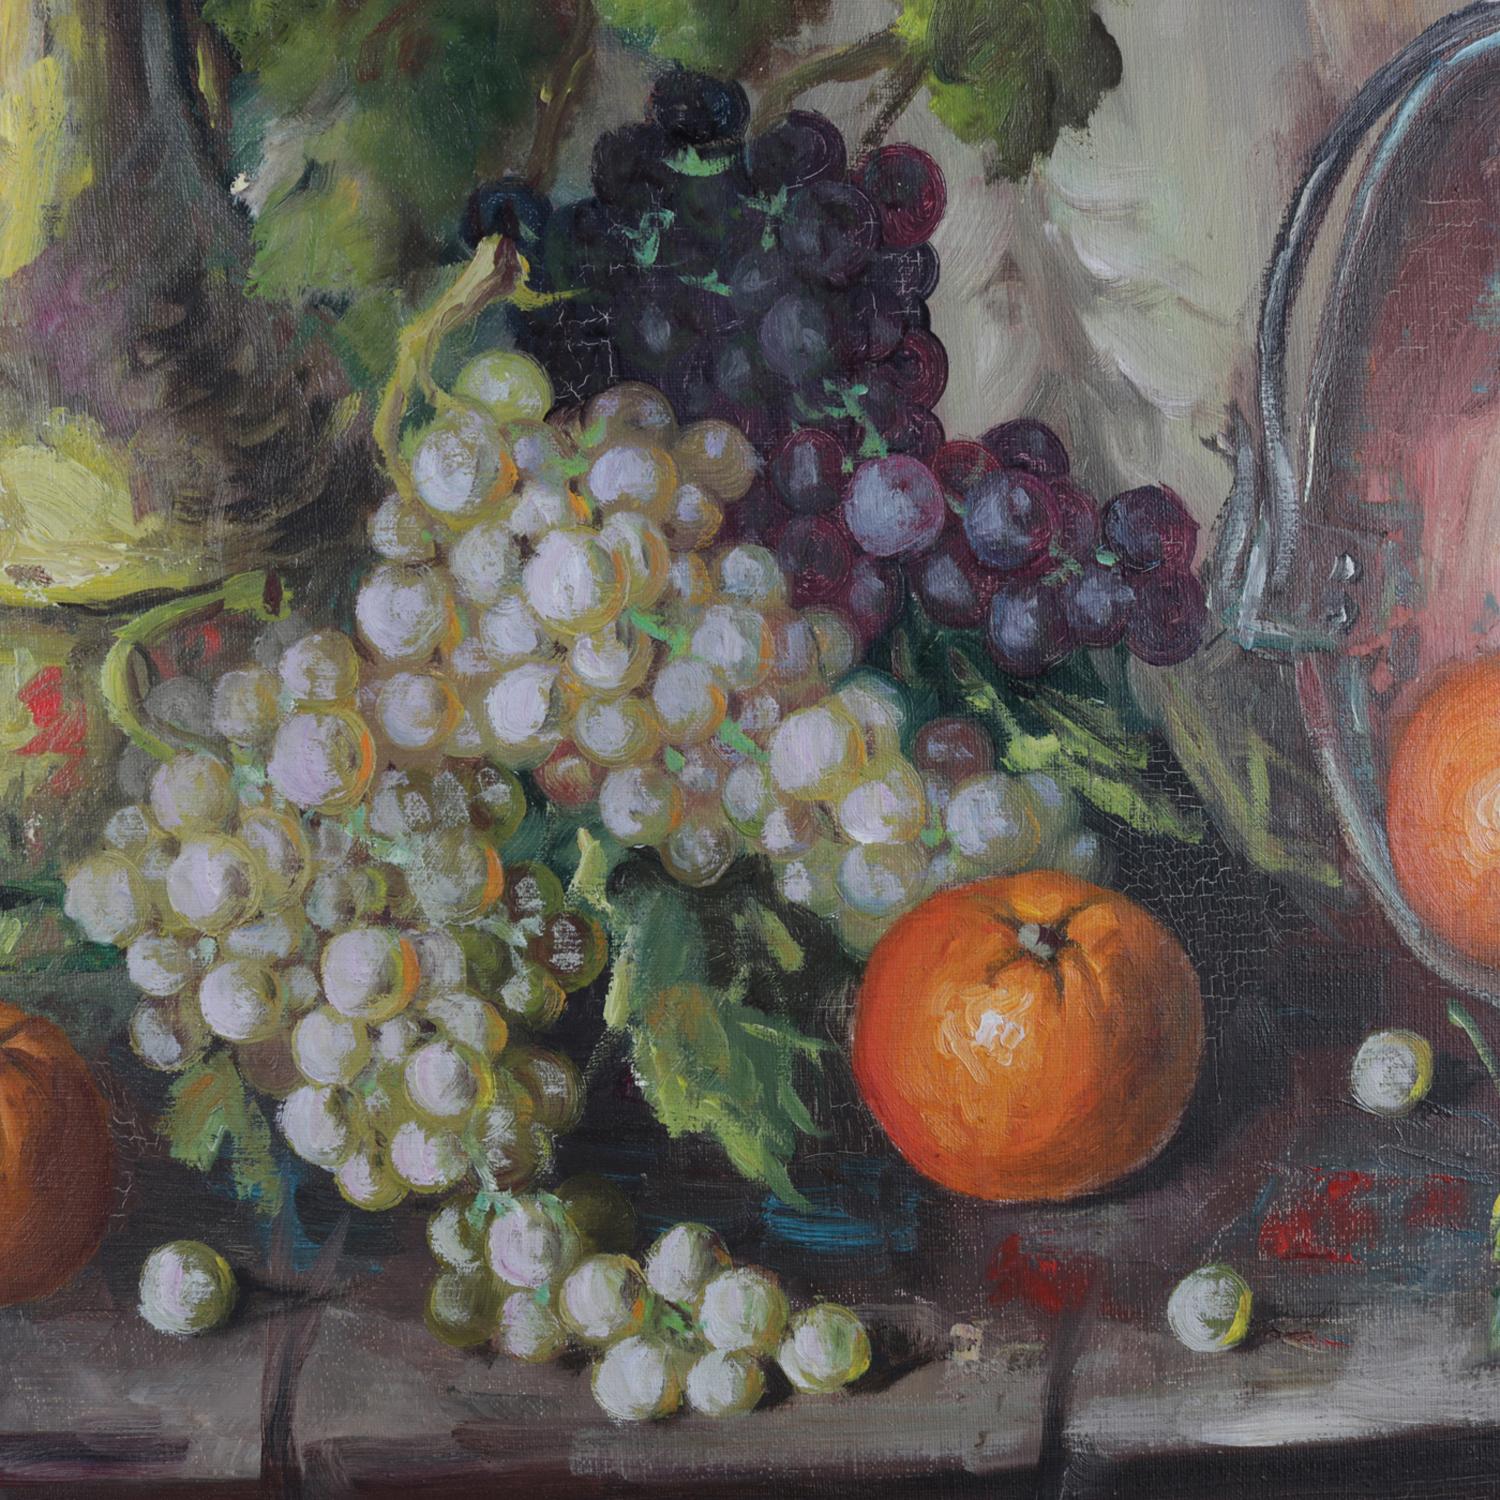 A vintage Spanish oil on canvas still life painting by V. Lazaro representing fruit and wine, signed lower left, seated in giltwood frame, 20th century

***DELIVERY NOTICE – Due to COVID-19 we are employing NO-CONTACT PRACTICES in the transfer of